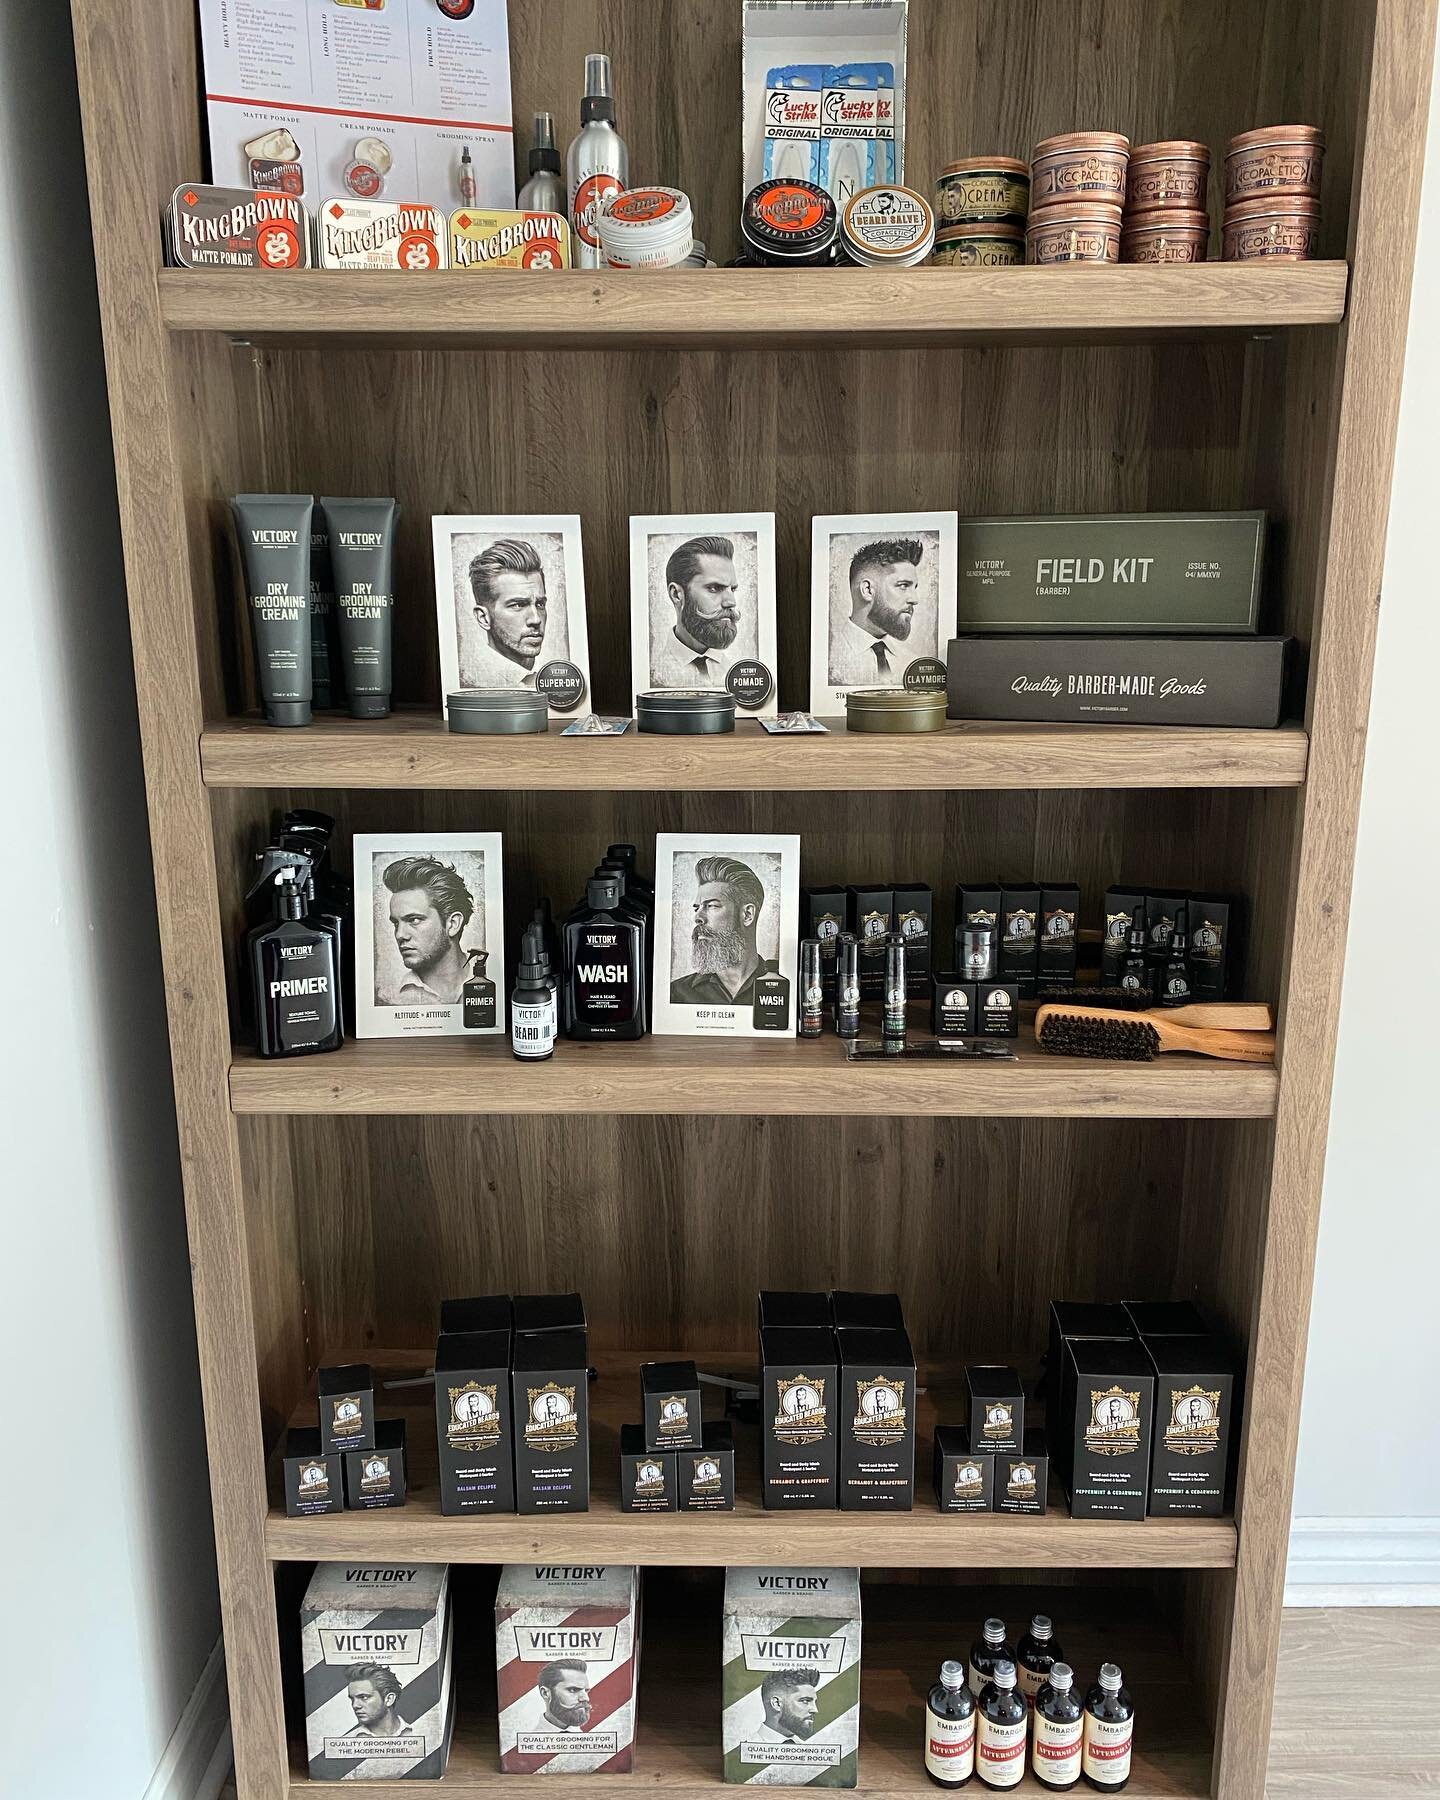 Fully stocked again! Feels good to see our shelves packed with the best brands! Thank you to our brands for the quick turnarounds on getting us these fine products.